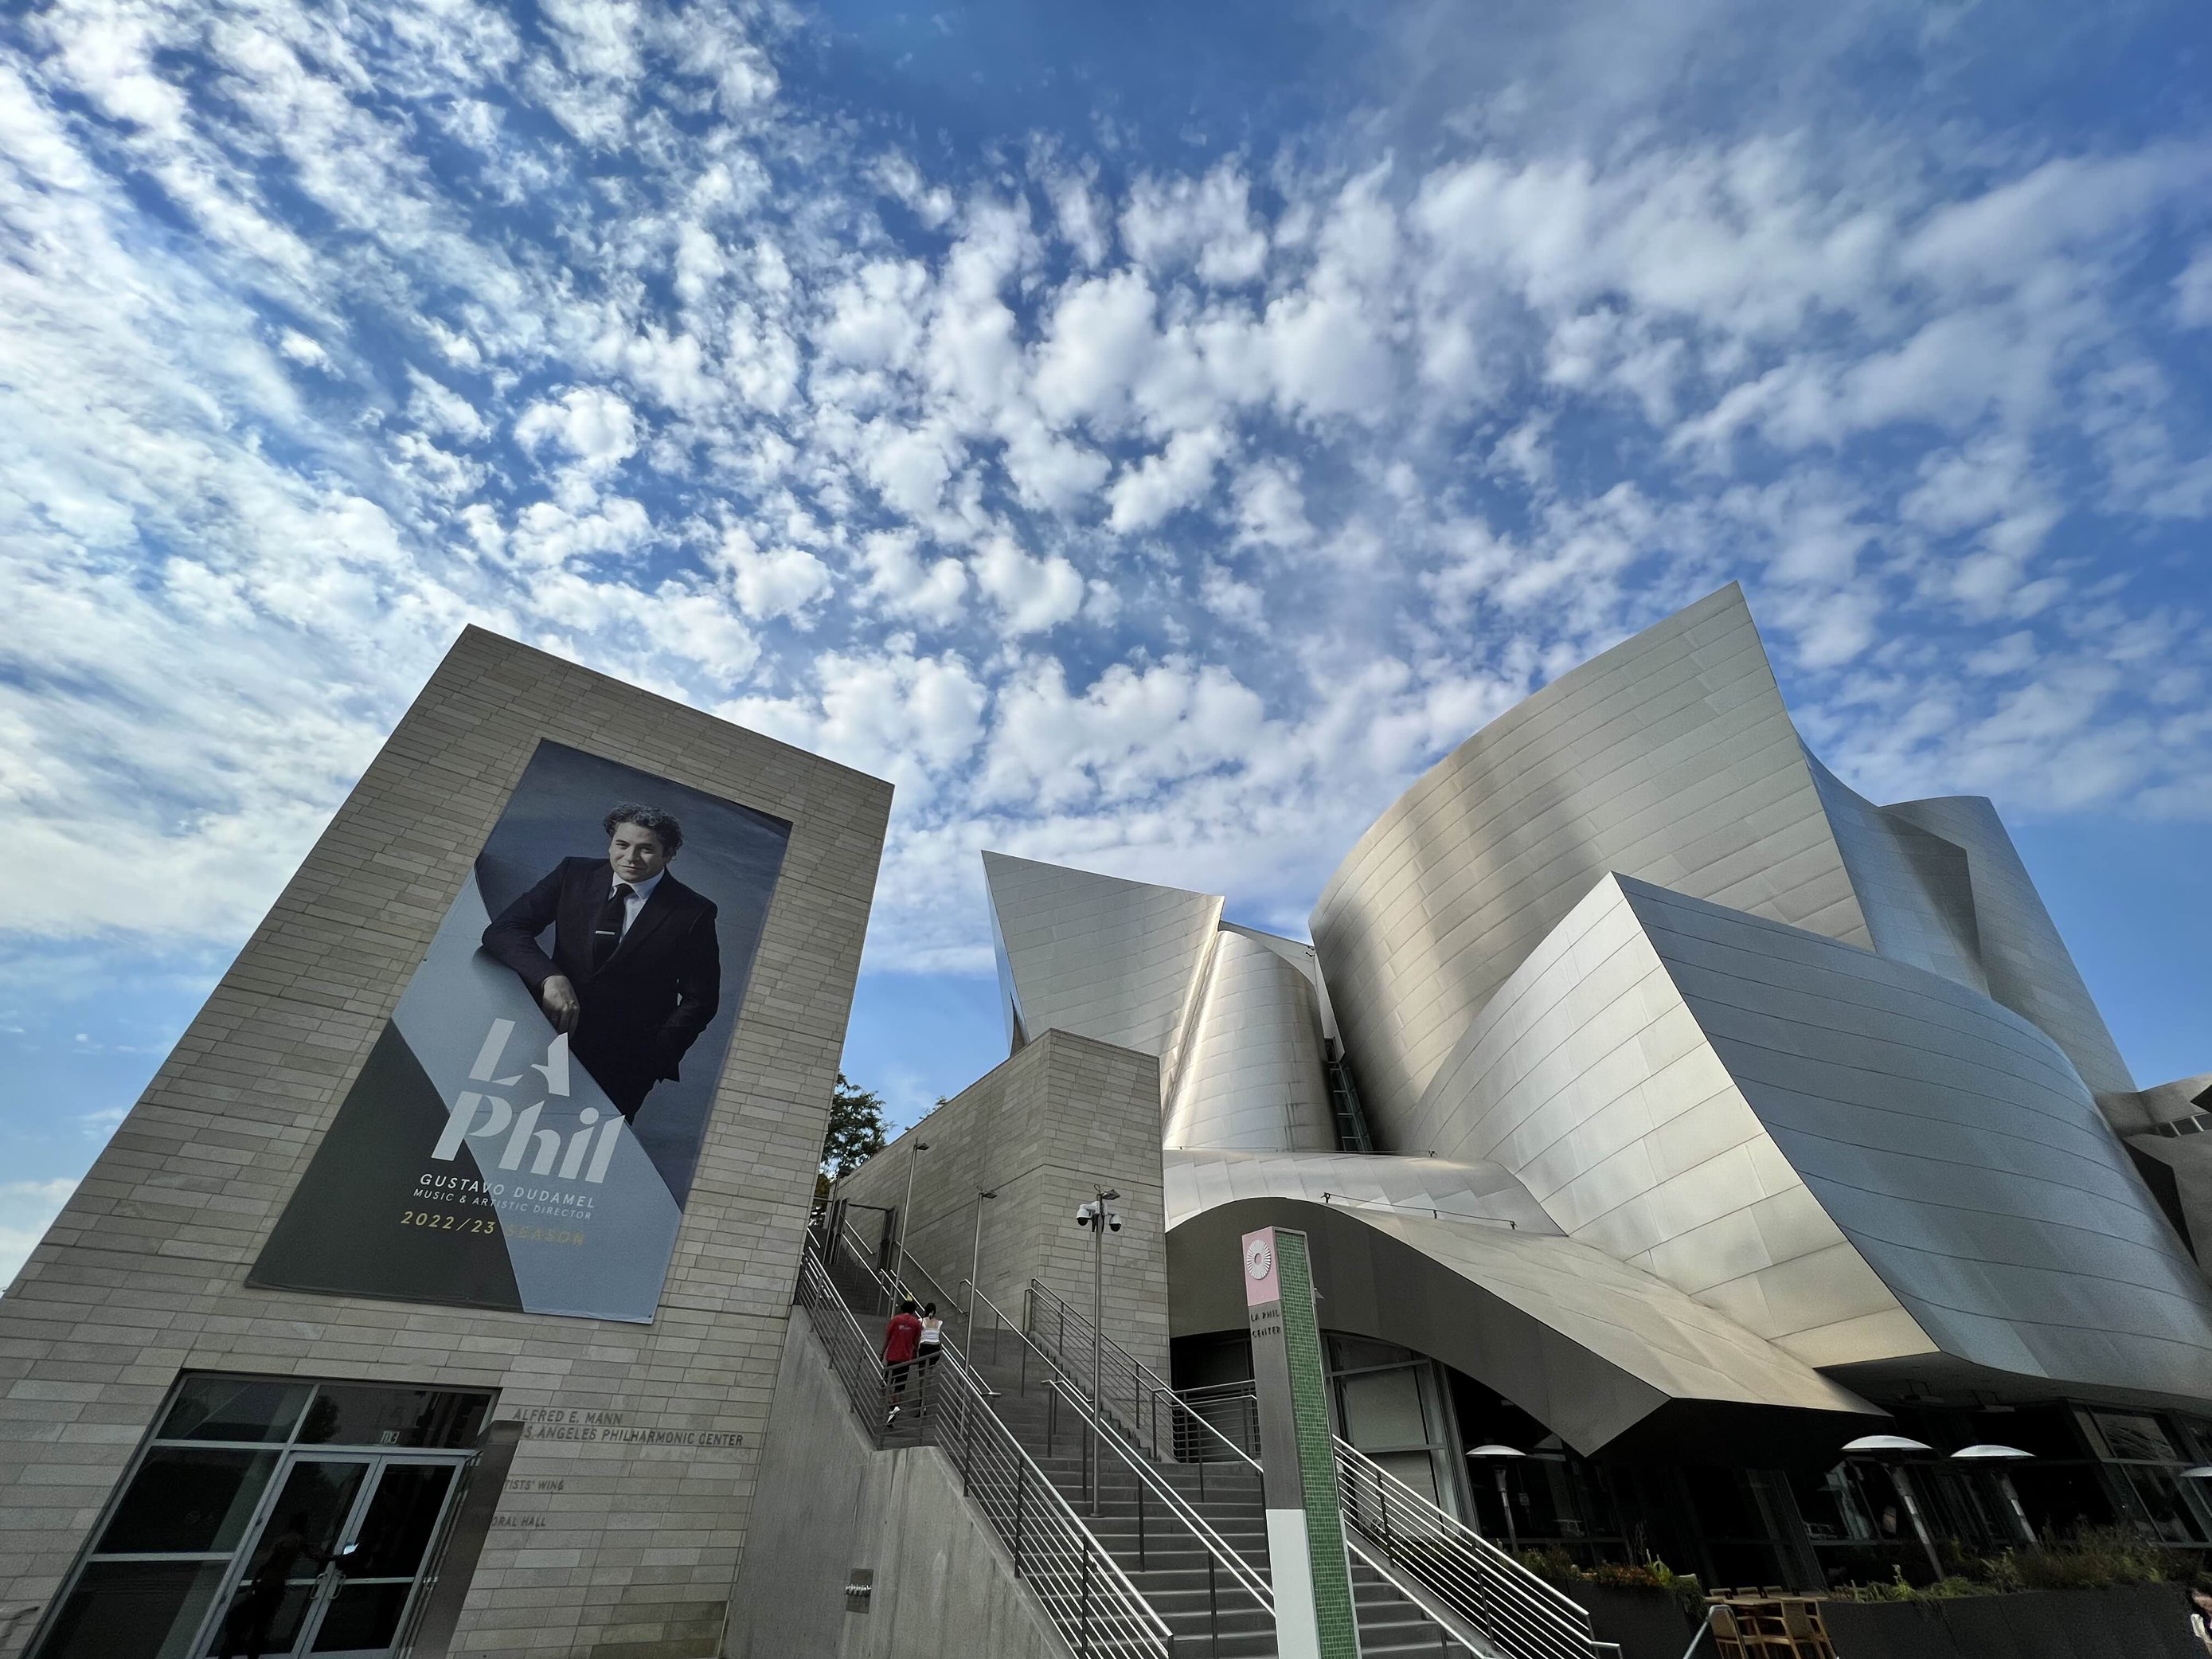 10 Frank Gehry Buildings to See in L.A.